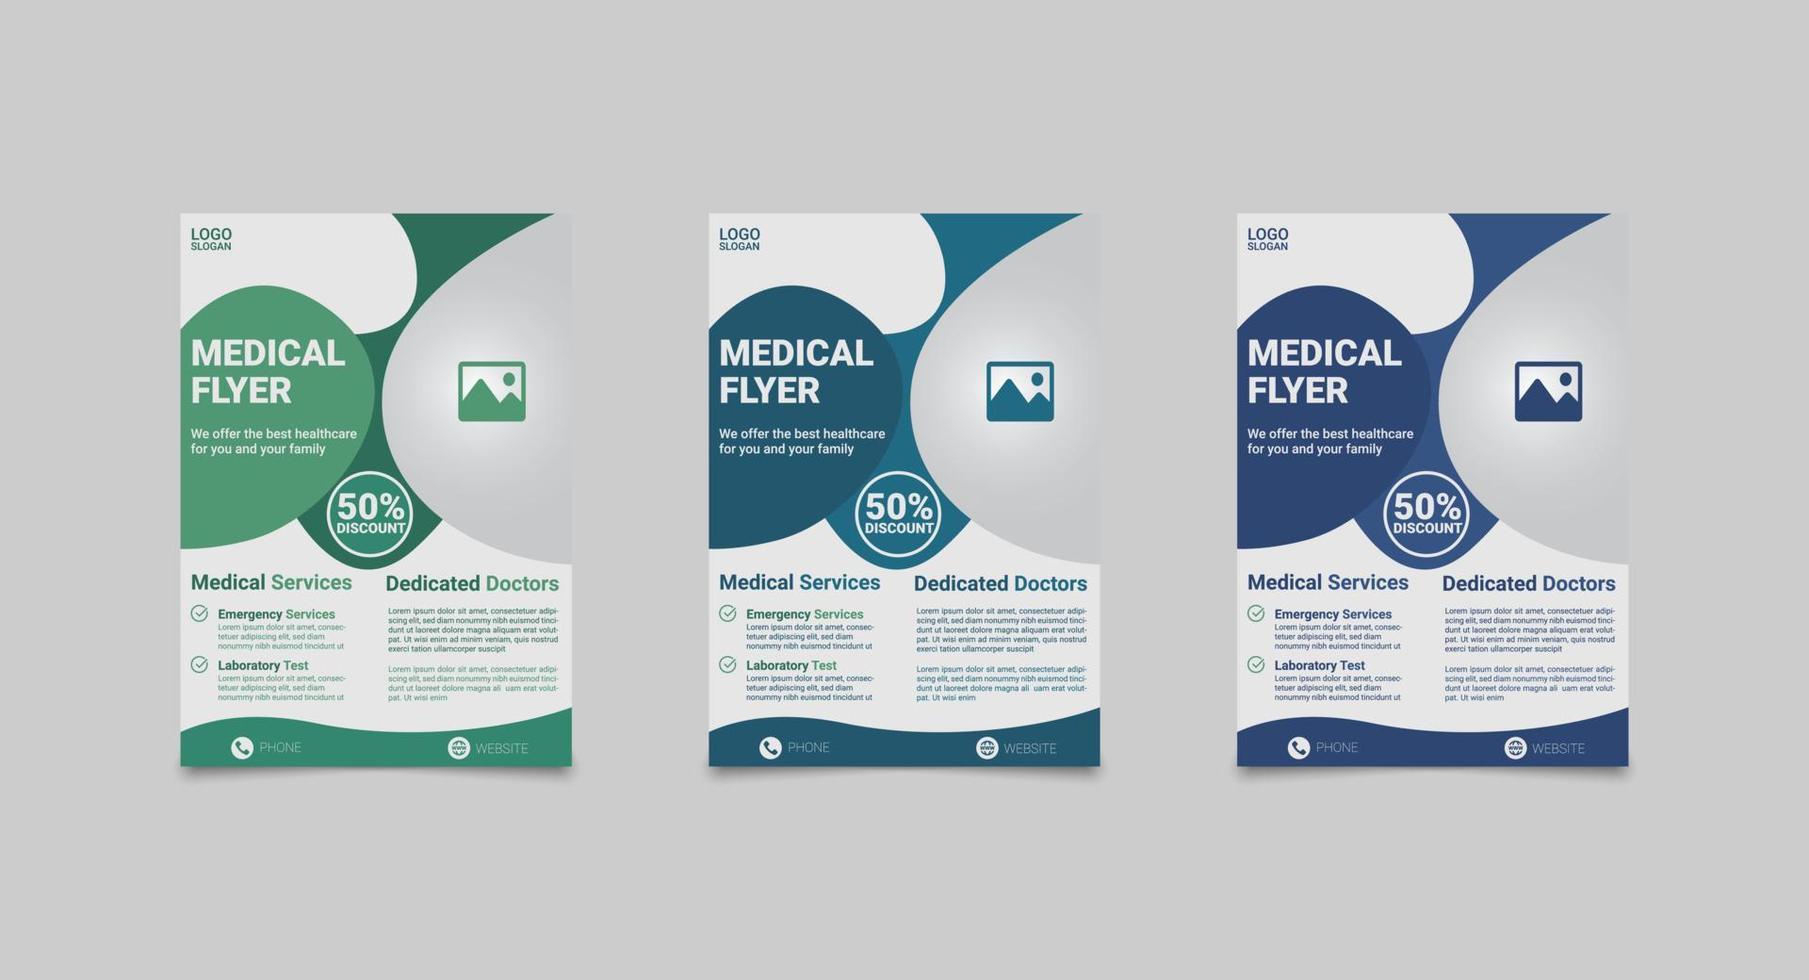 Medical flyer design template. A4 size and fully editable vector